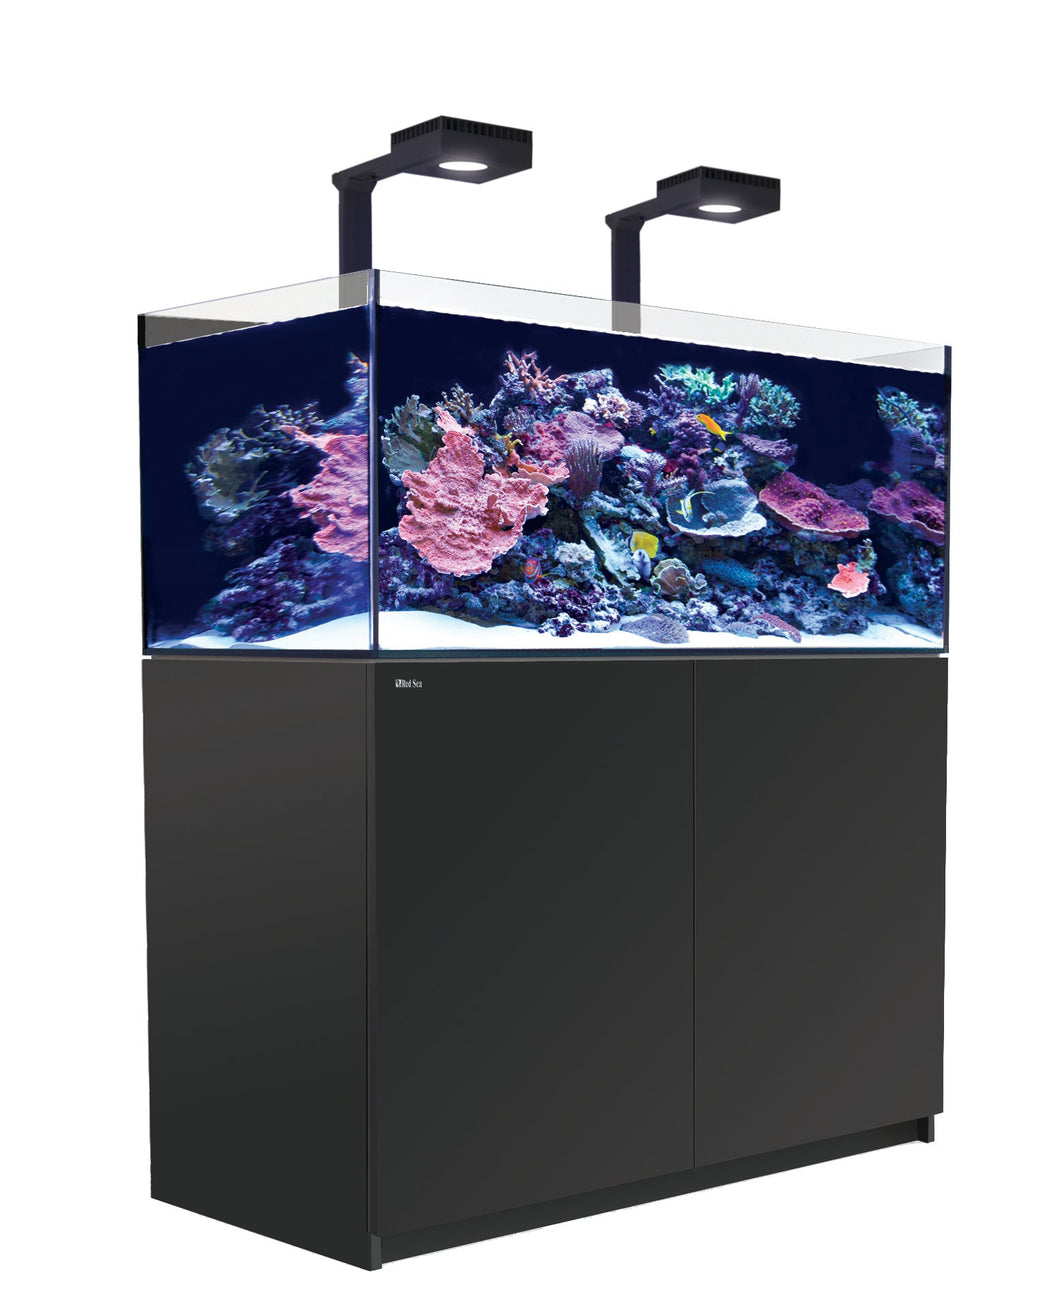 REEFER XL 425 G2 Deluxe System - Black available at Coral Passion, Essex